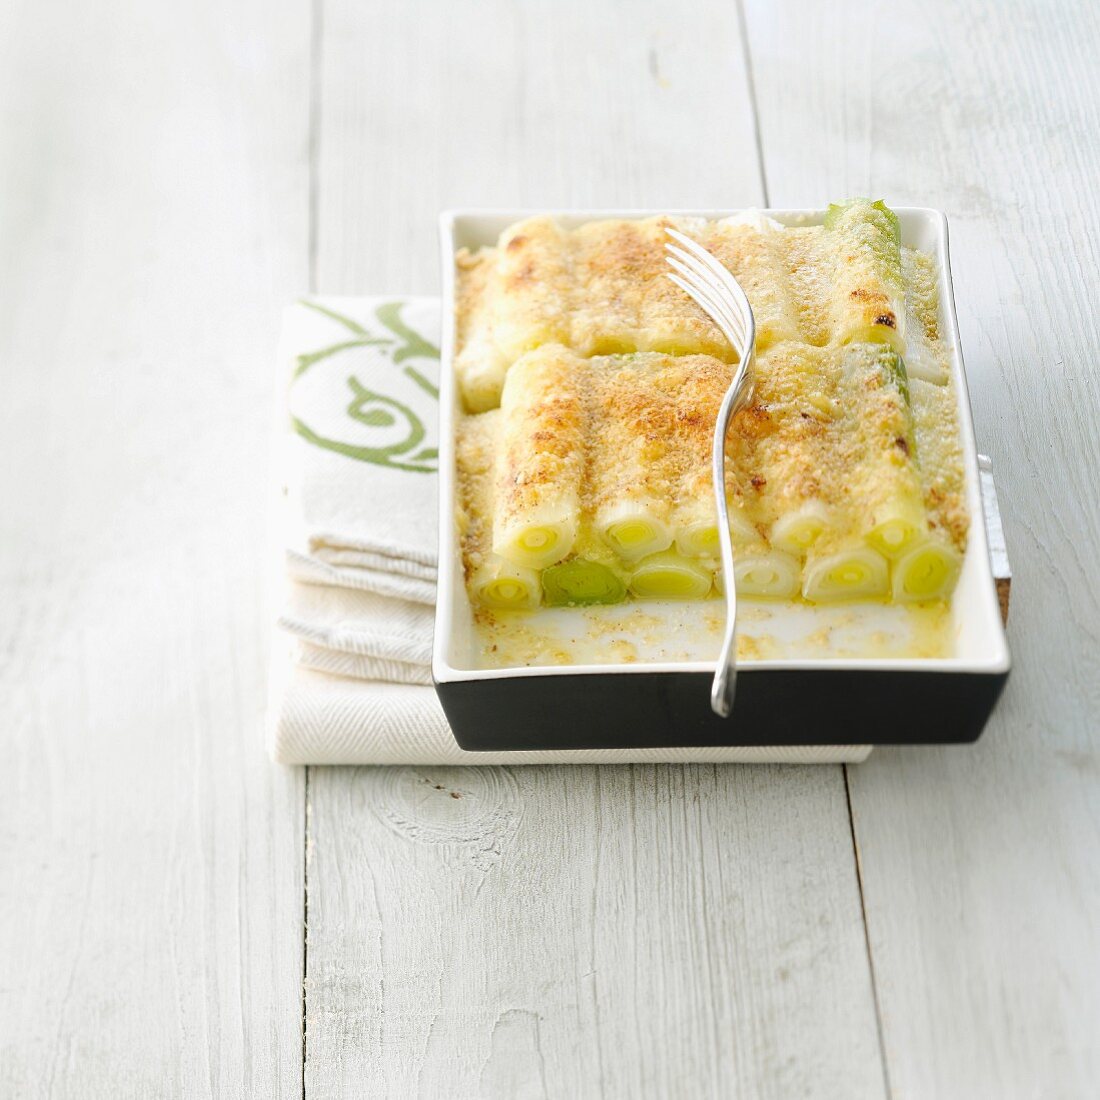 Leek and Beaufort cheese-topped dish